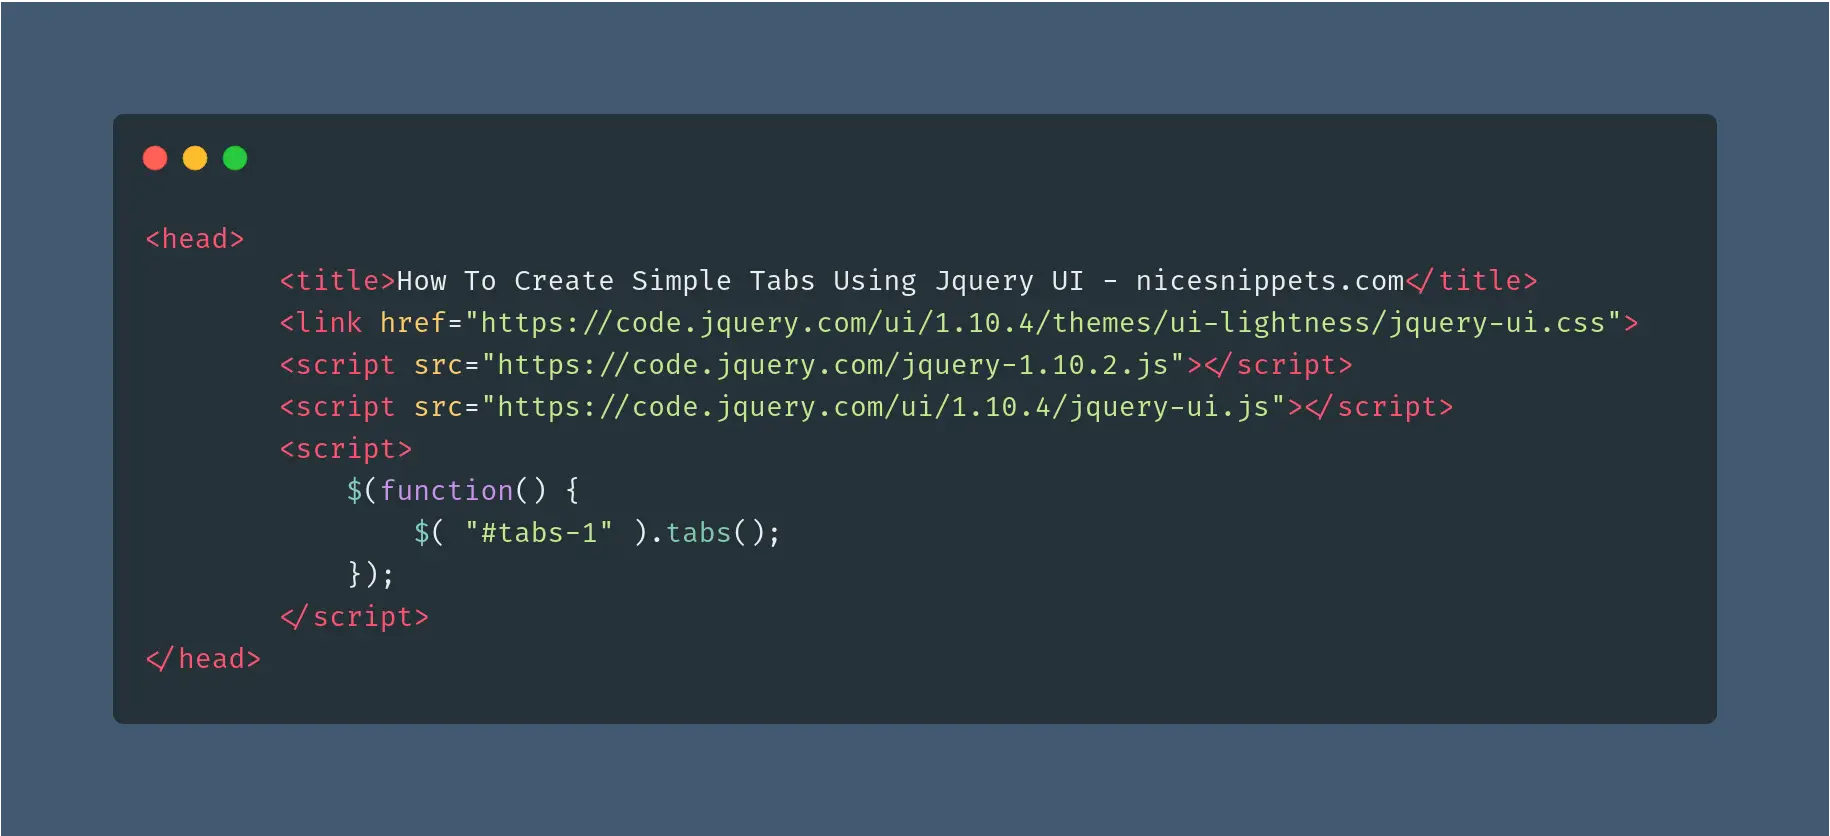 How To Create Simple Tabs Using Jquery UI?